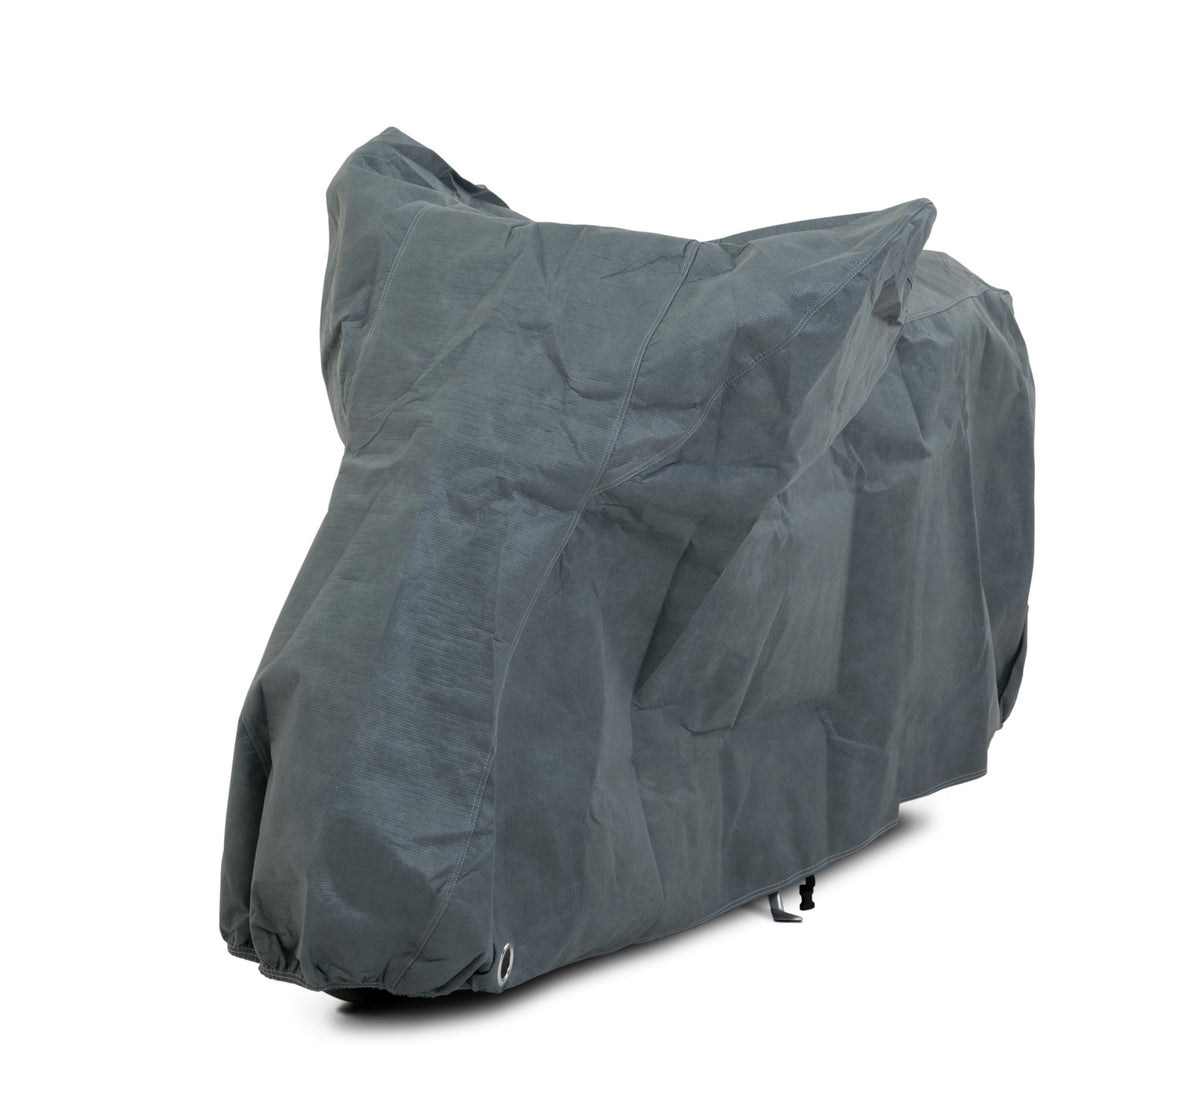 Stormforce best outdoor motorcycle covers for LAMBRETTA - Storm Motorcycle Covers